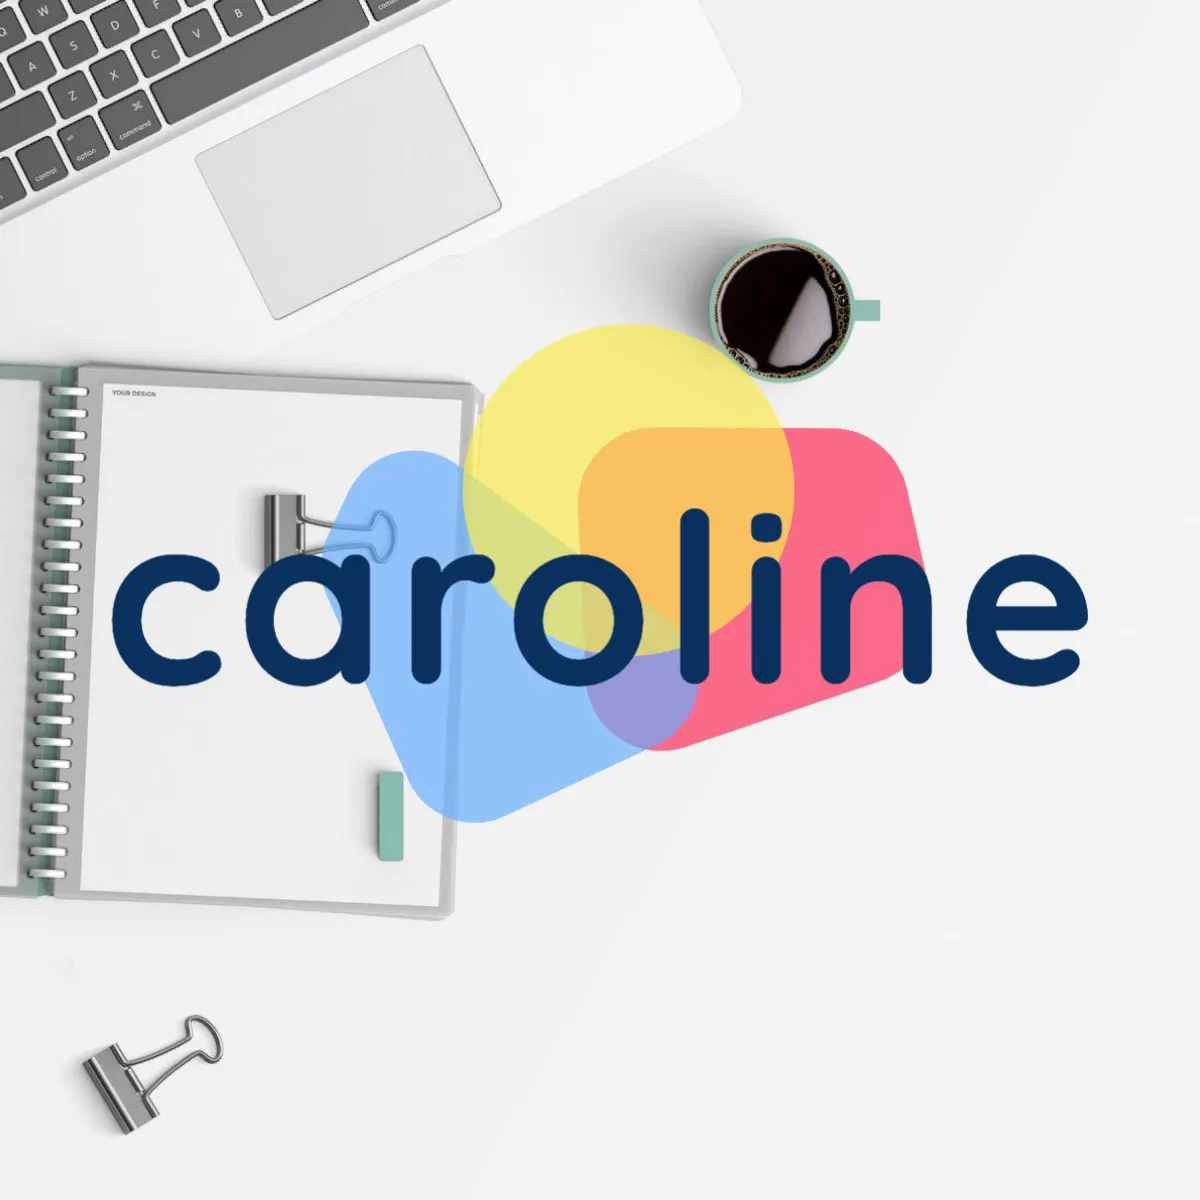 Primary Color Shape Personal Brand Logo